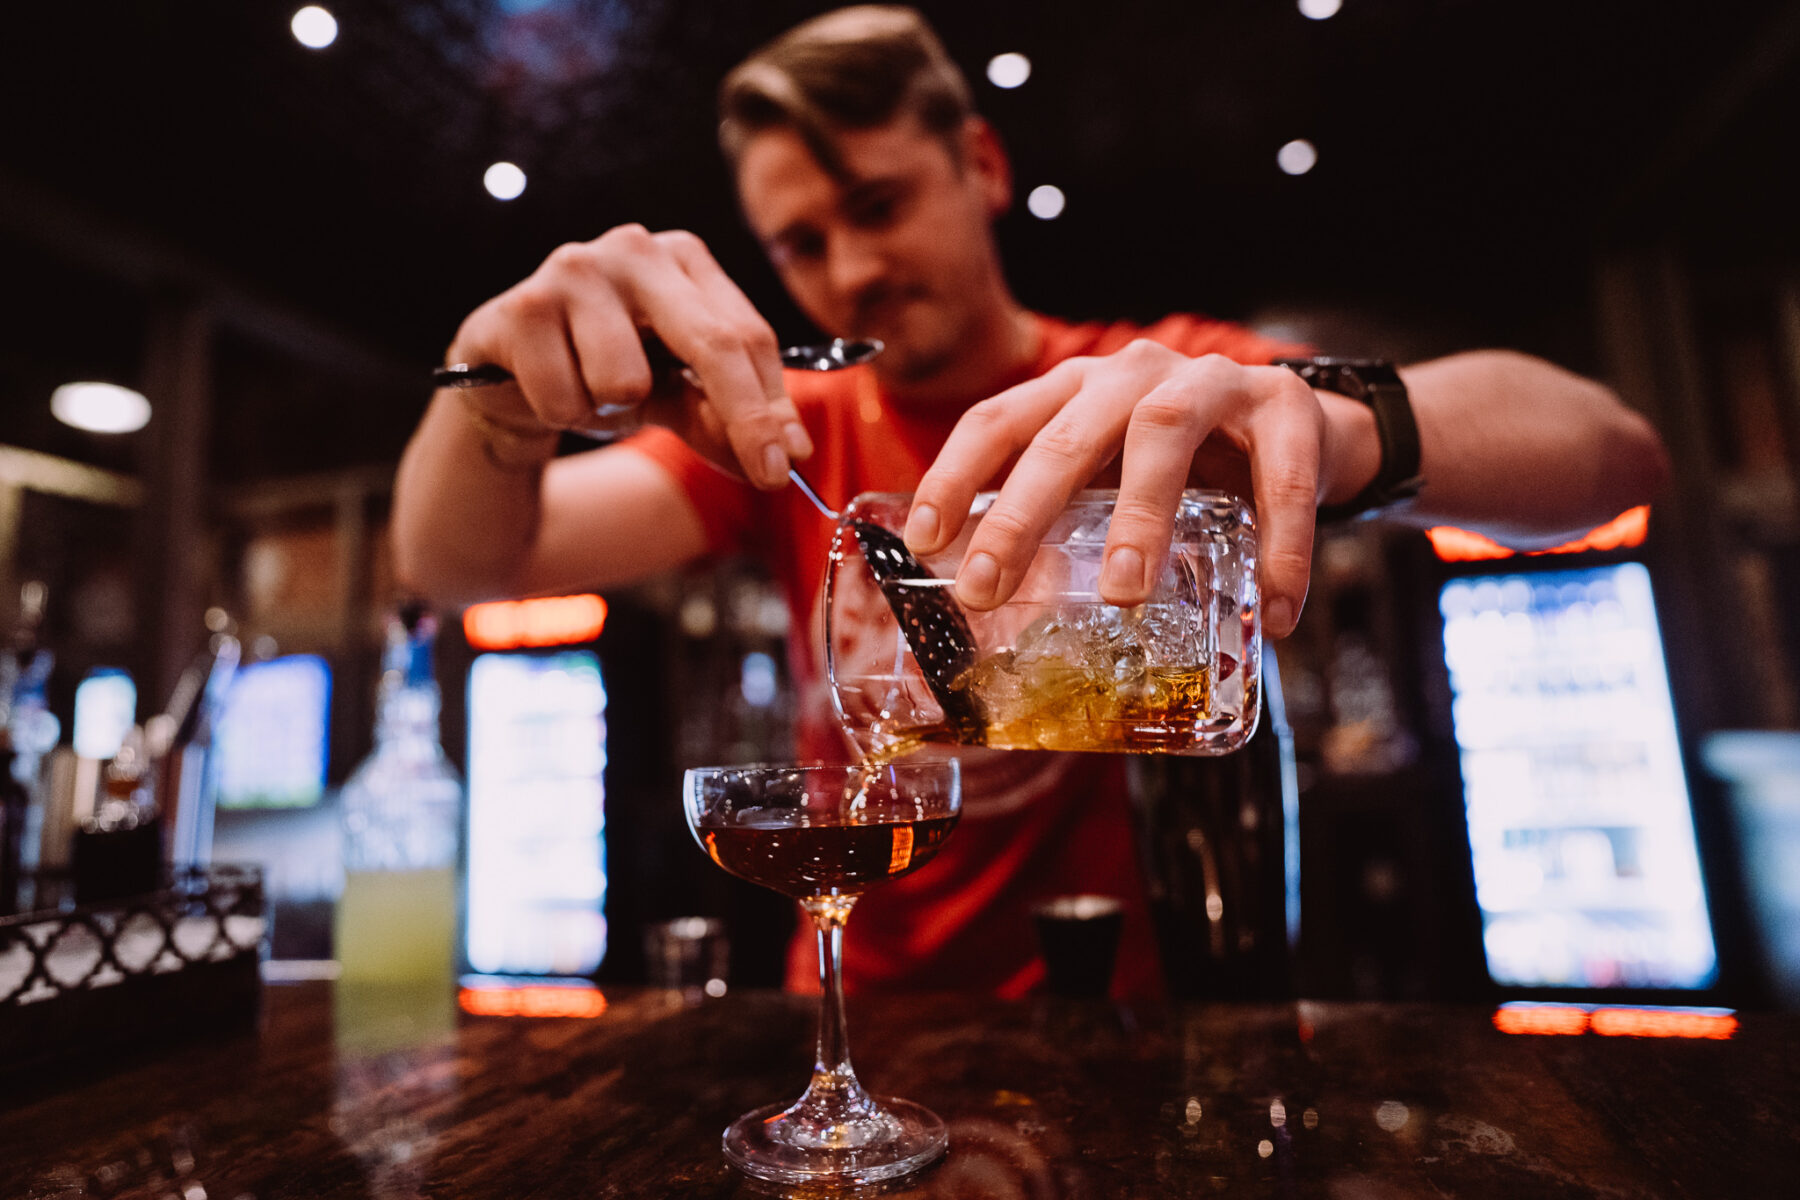 One of our expert bartenders makes a craft cocktail for a guest